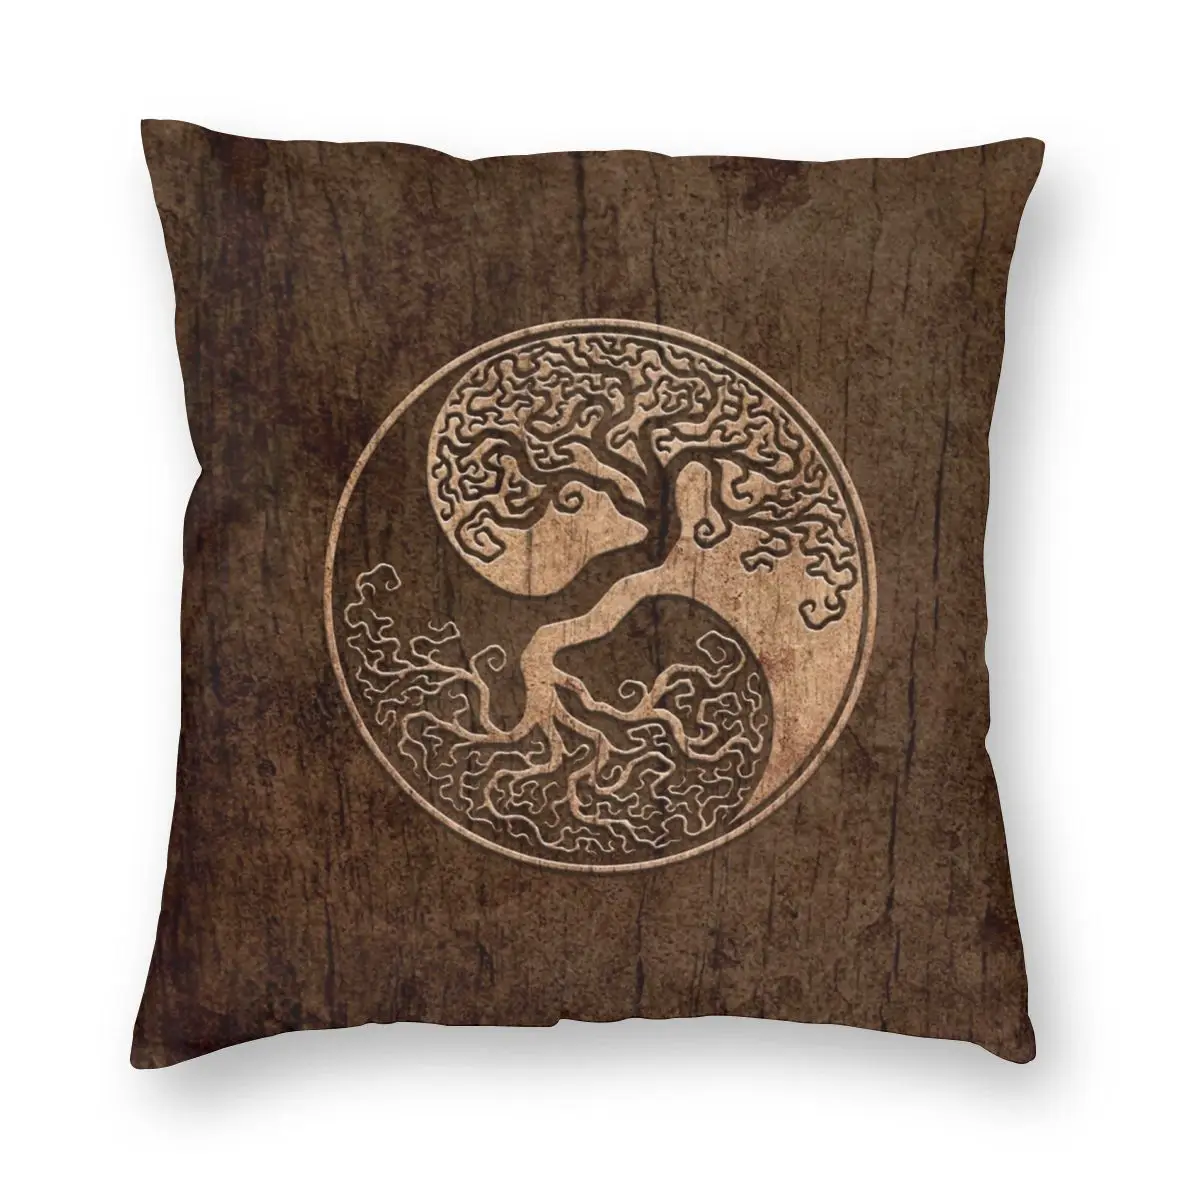 

Rough Wood Grain Effect Tree Of Life Yin Yang Vikings Pillowcase Soft Polyester Cushion Cover Decoration Pillow Case Cover Home